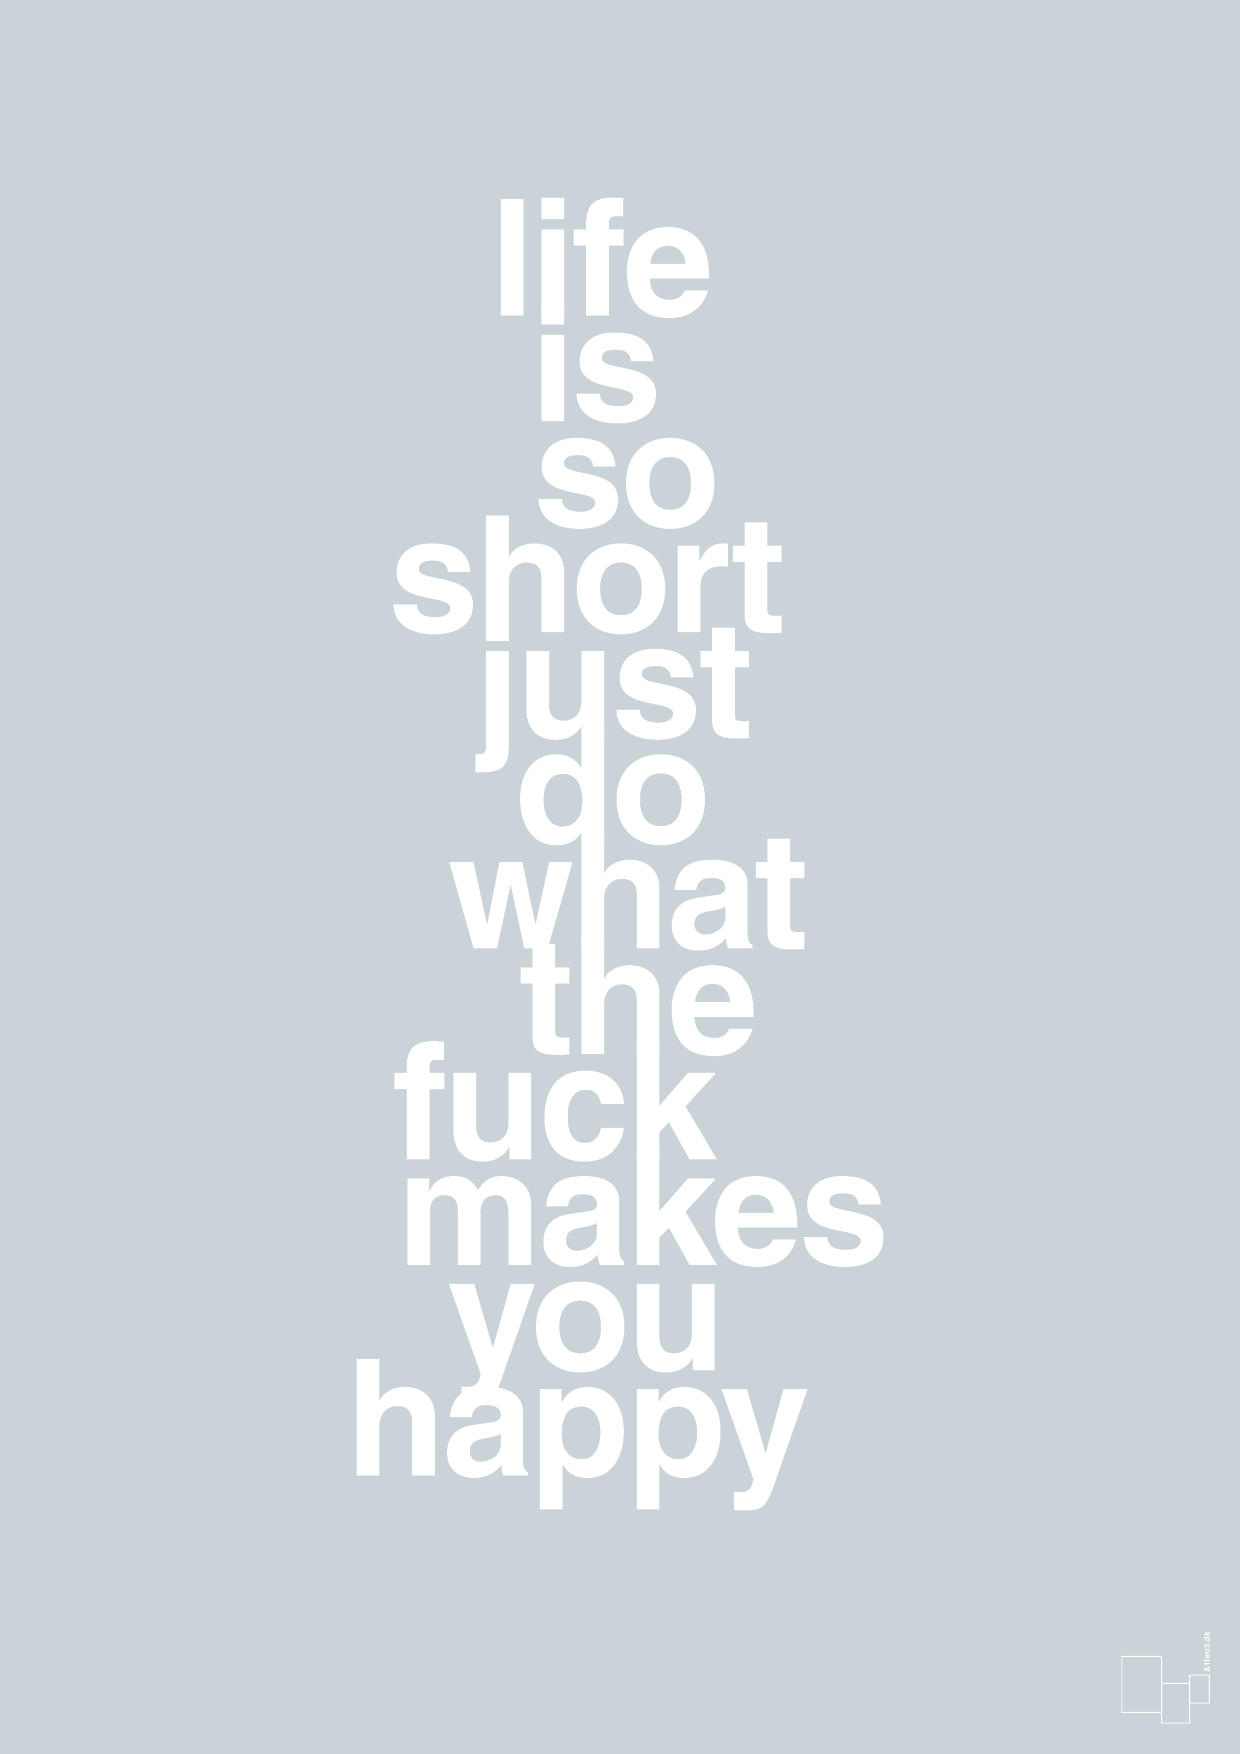 life is so short just do what the fuck makes you happy - Plakat med Ordsprog i Light Drizzle